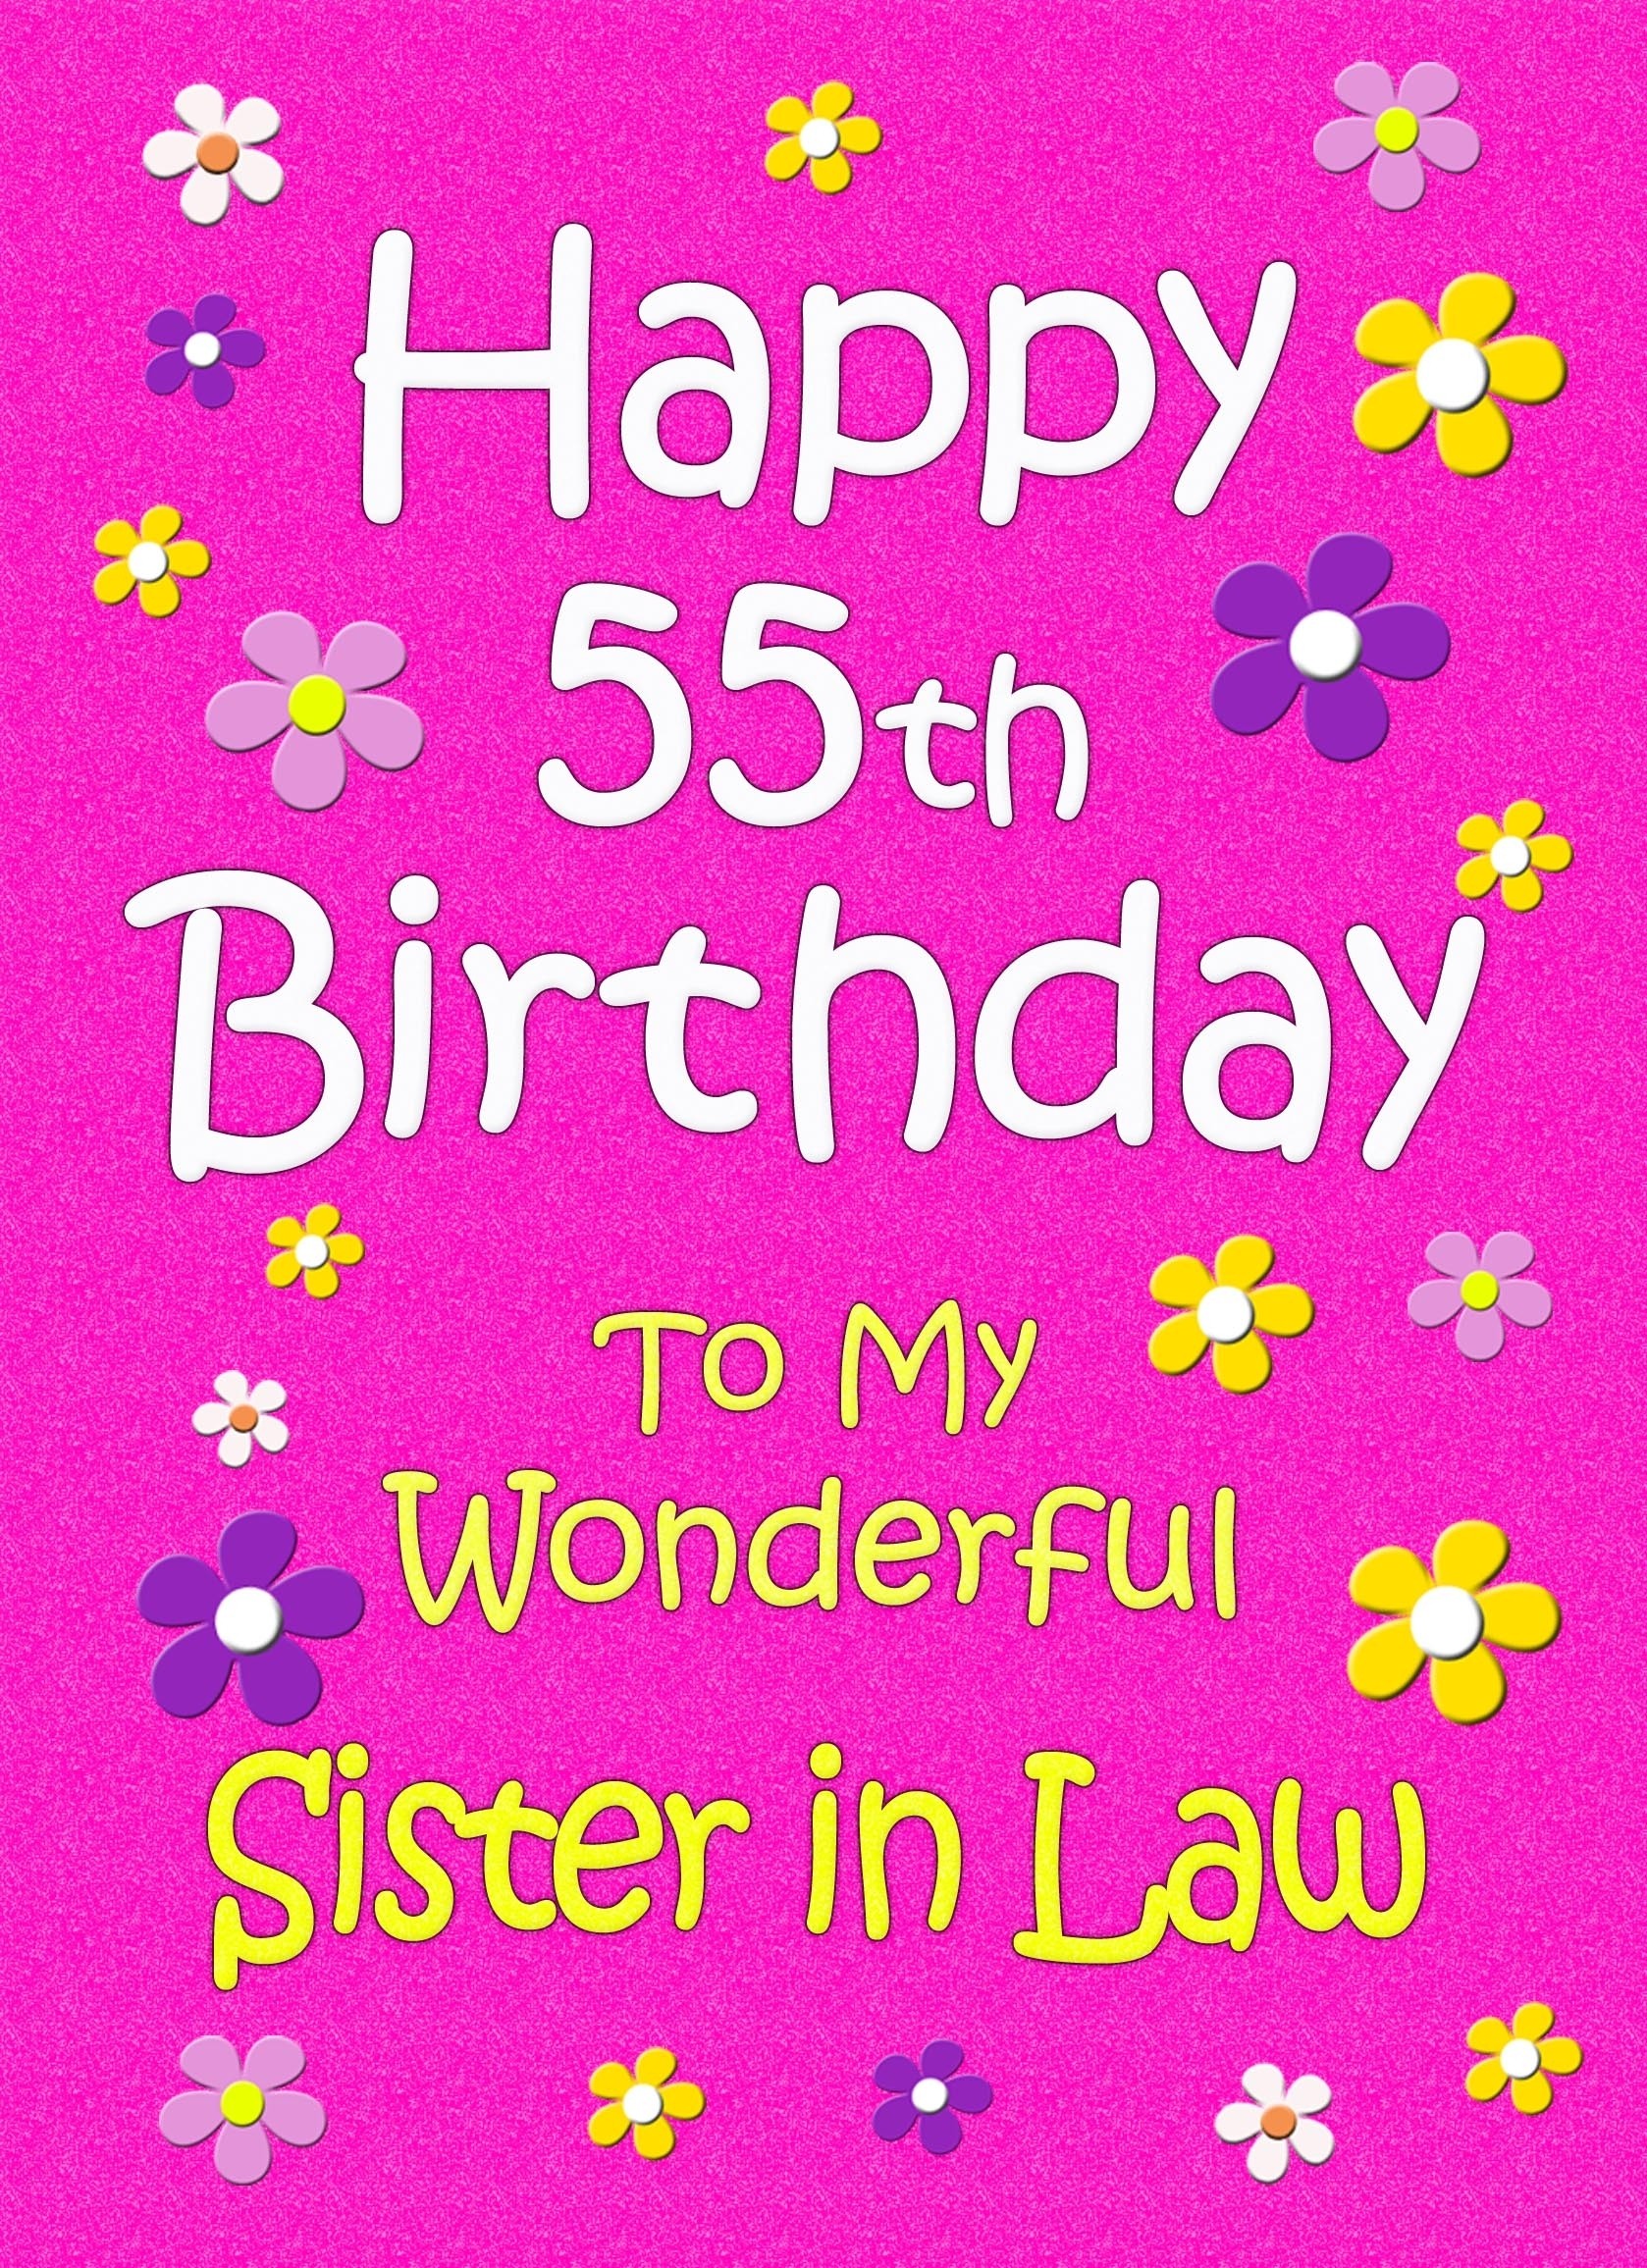 Sister in Law 55th Birthday Card (Pink)